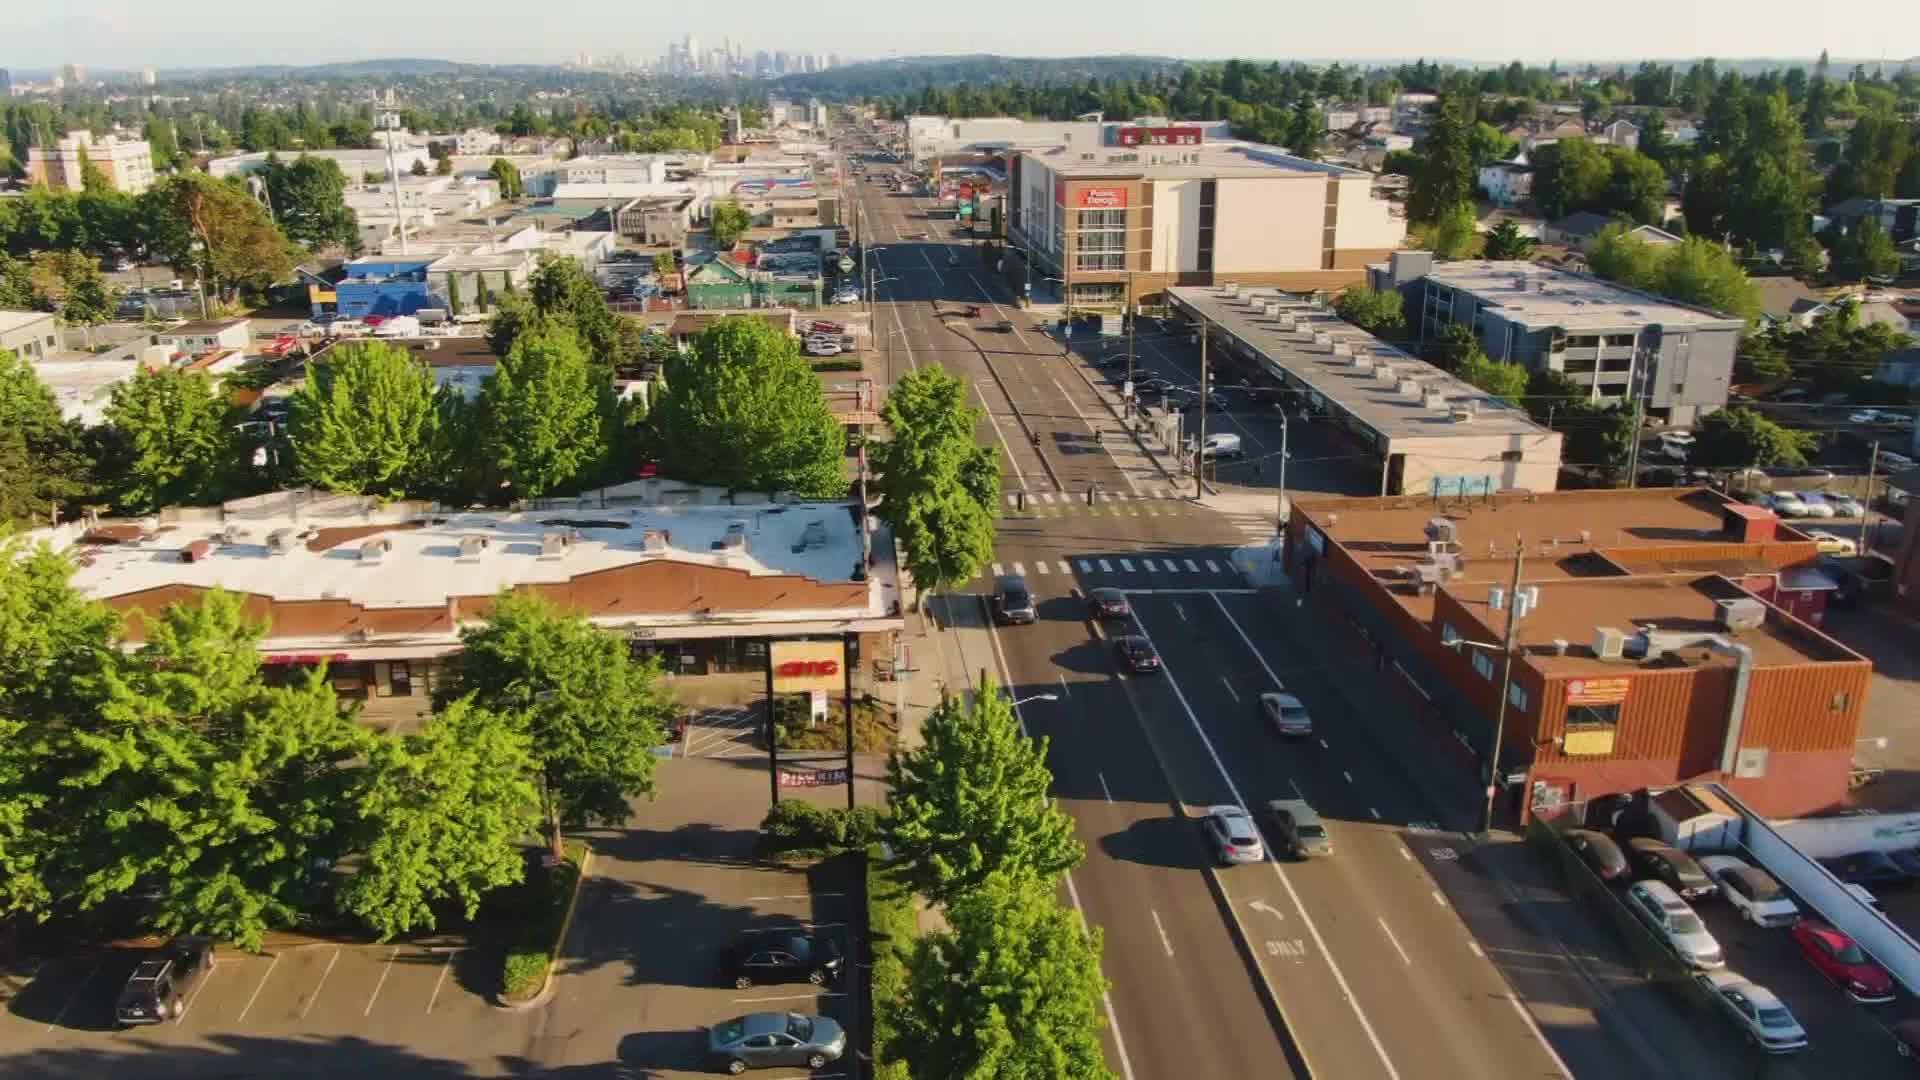 A community group is pushing for improvements along Aurora Avenue in Seattle.